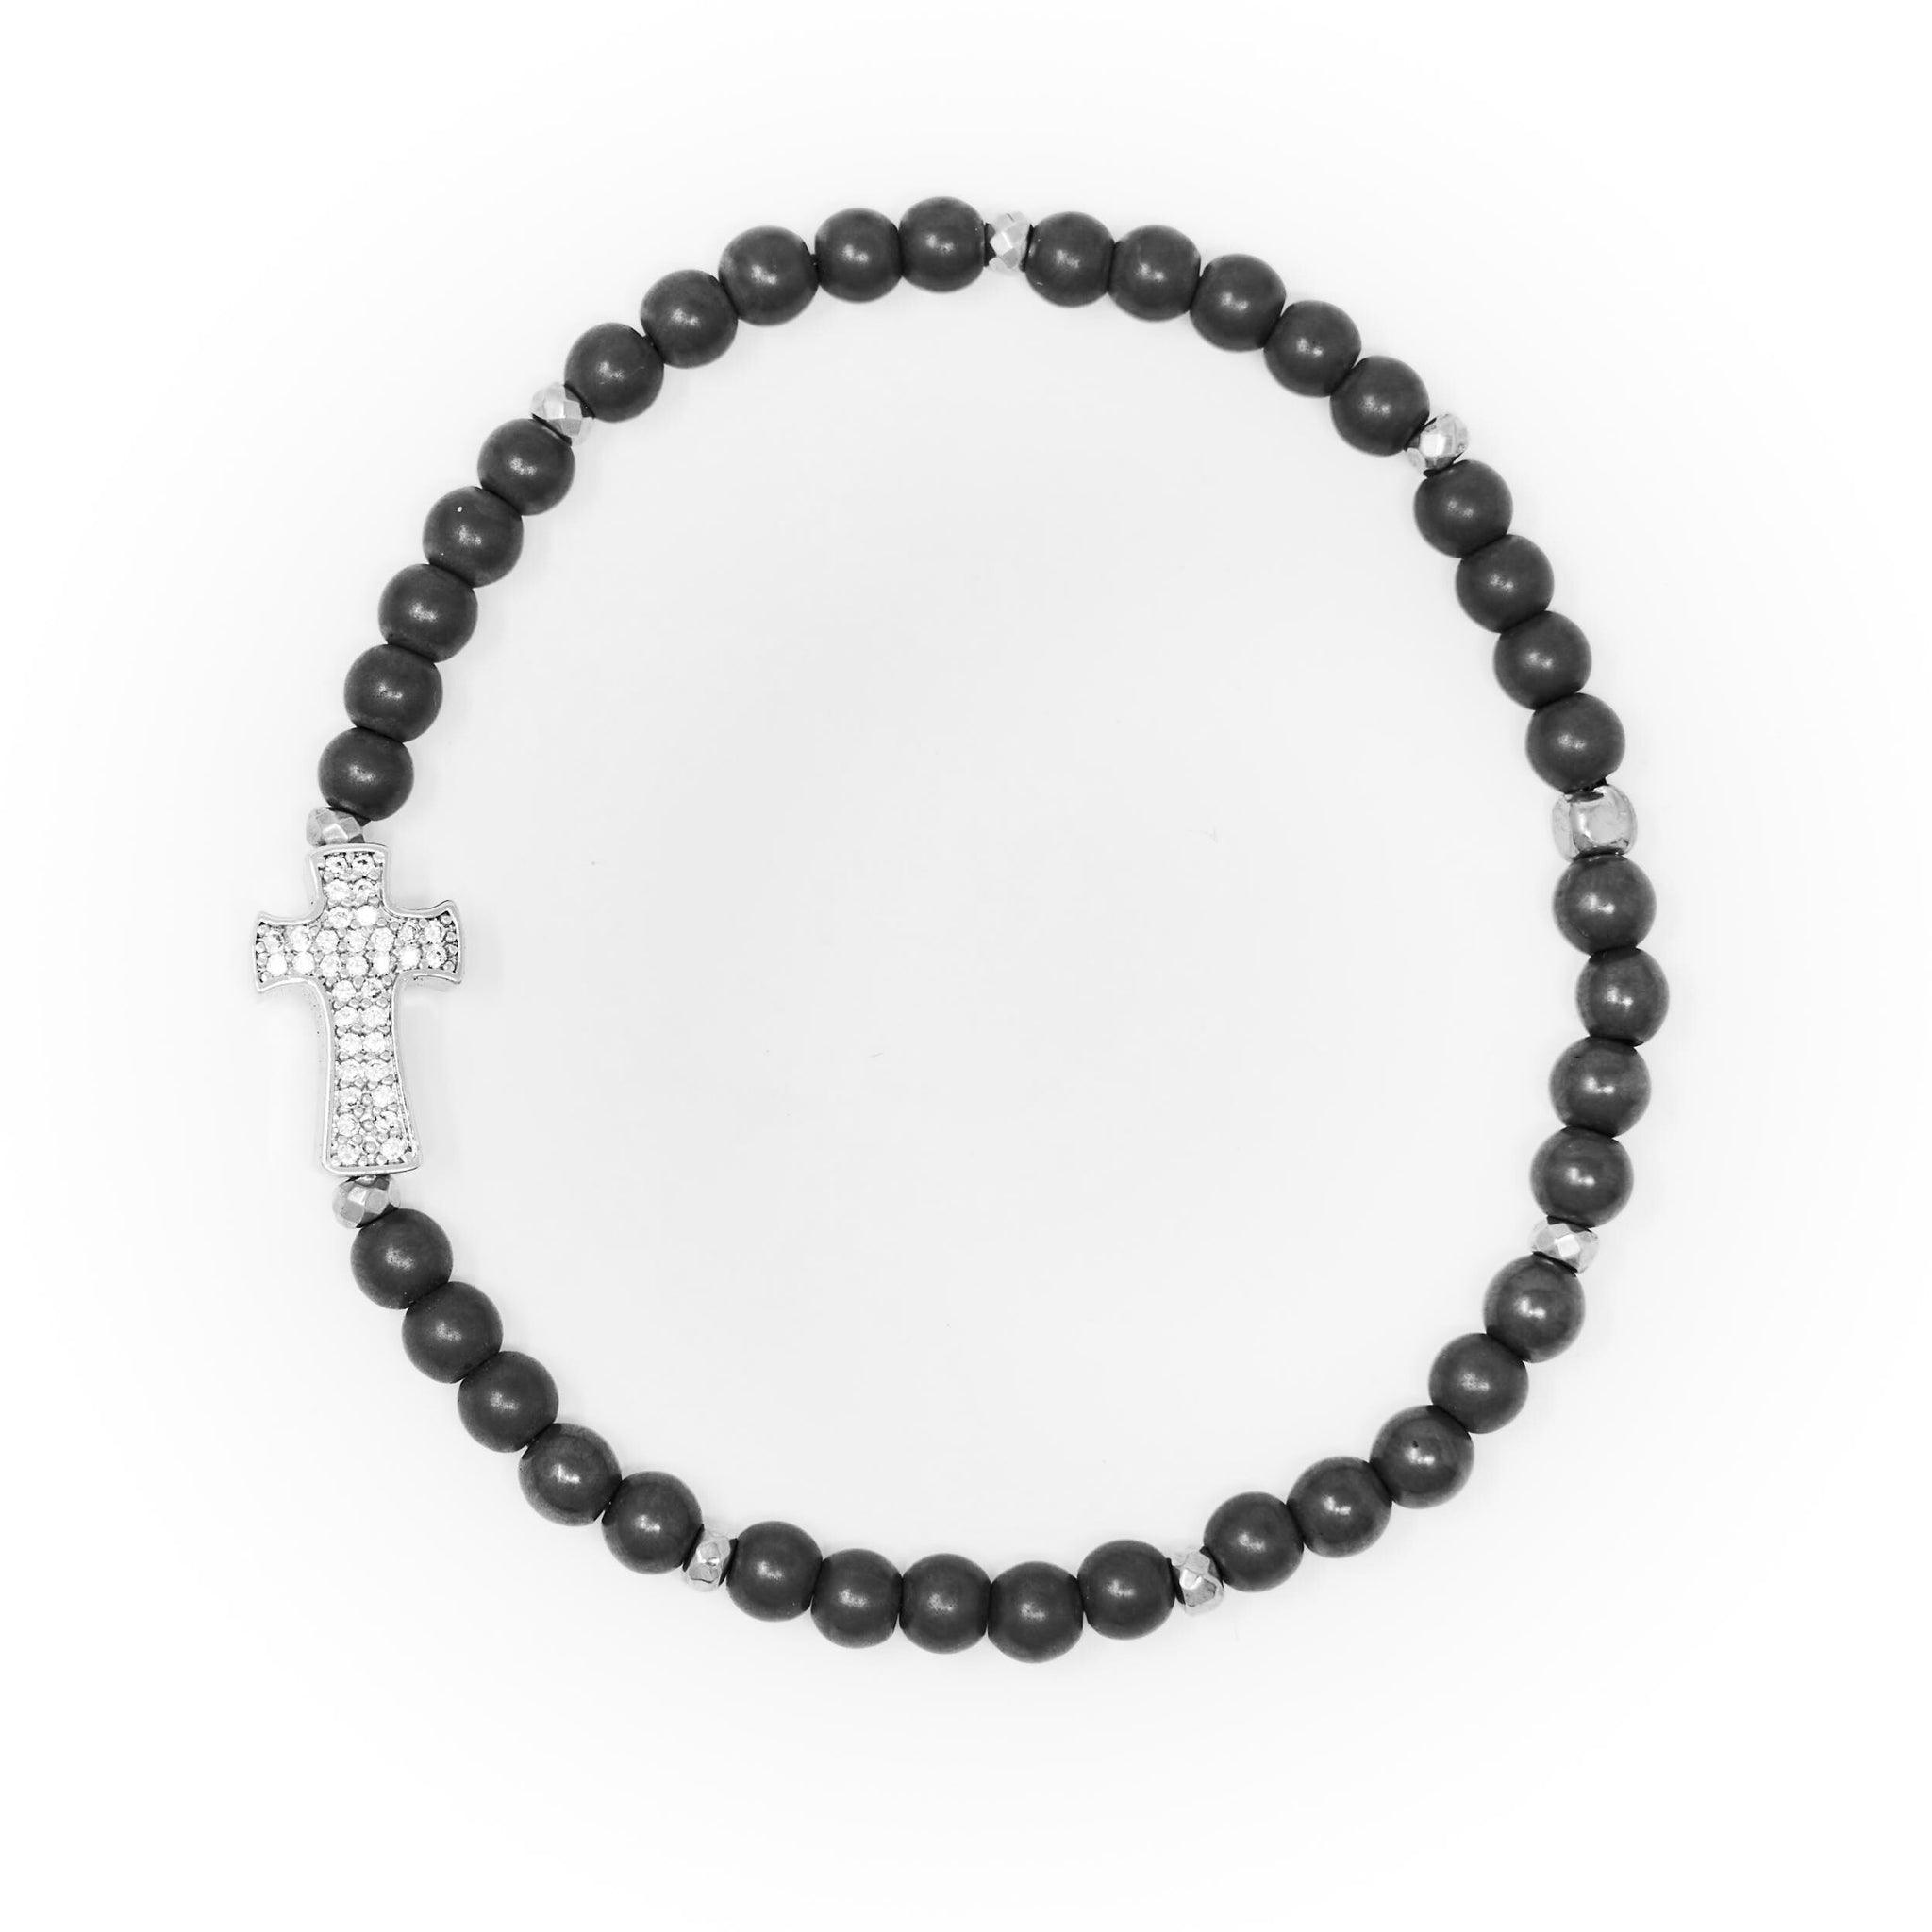 Hematite Matte with Silver Bracelet, Silver Cross Charm with Clear Zirconia